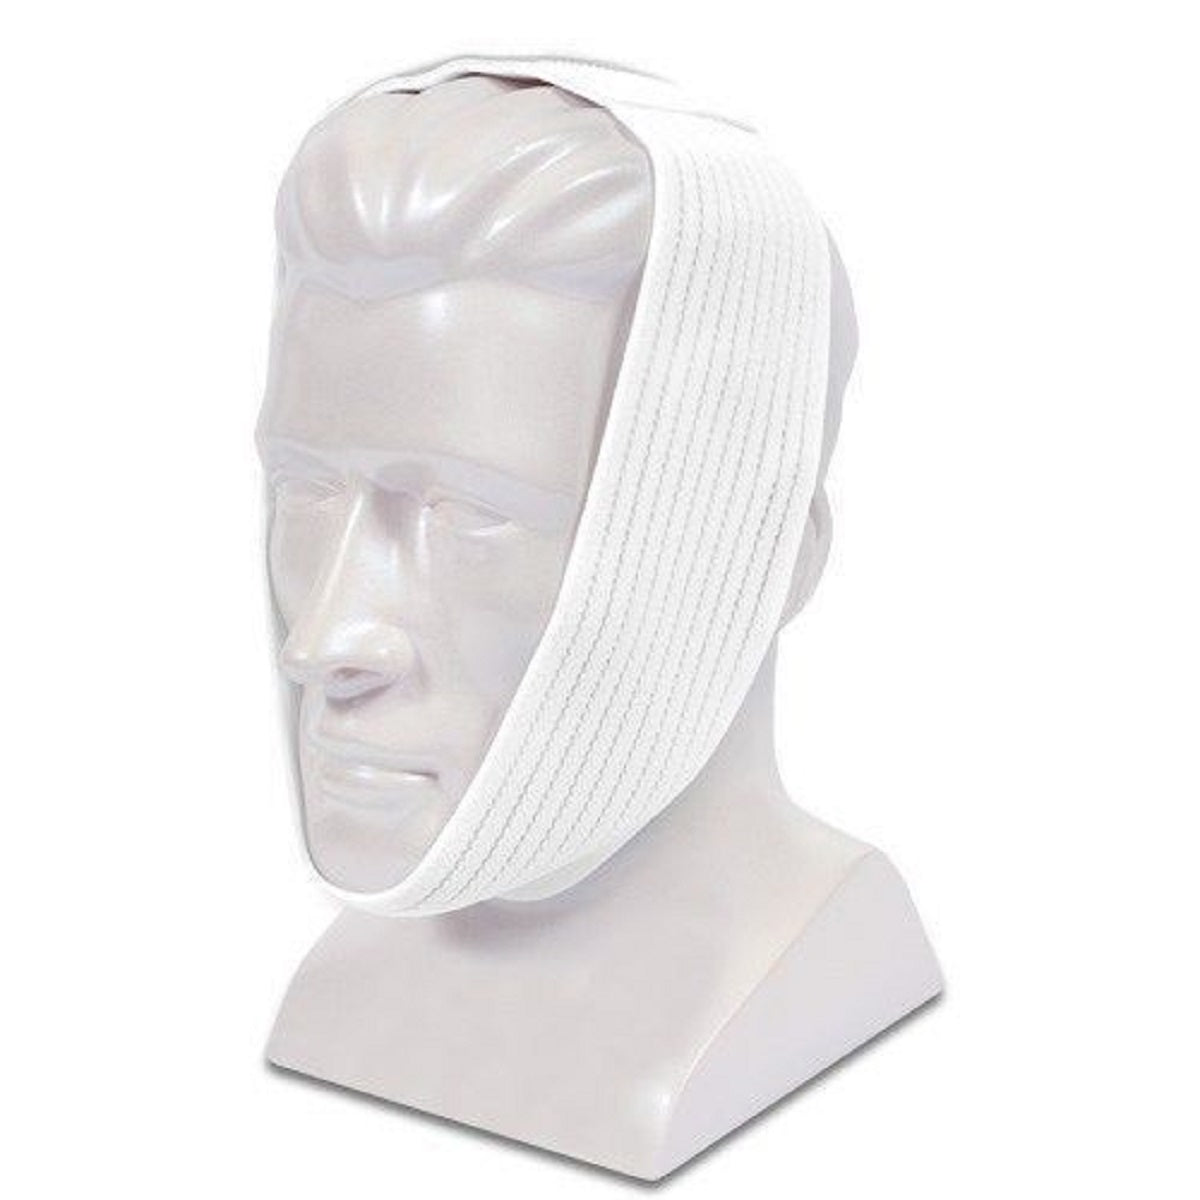 deluxe style chinstrap for cpap therapy